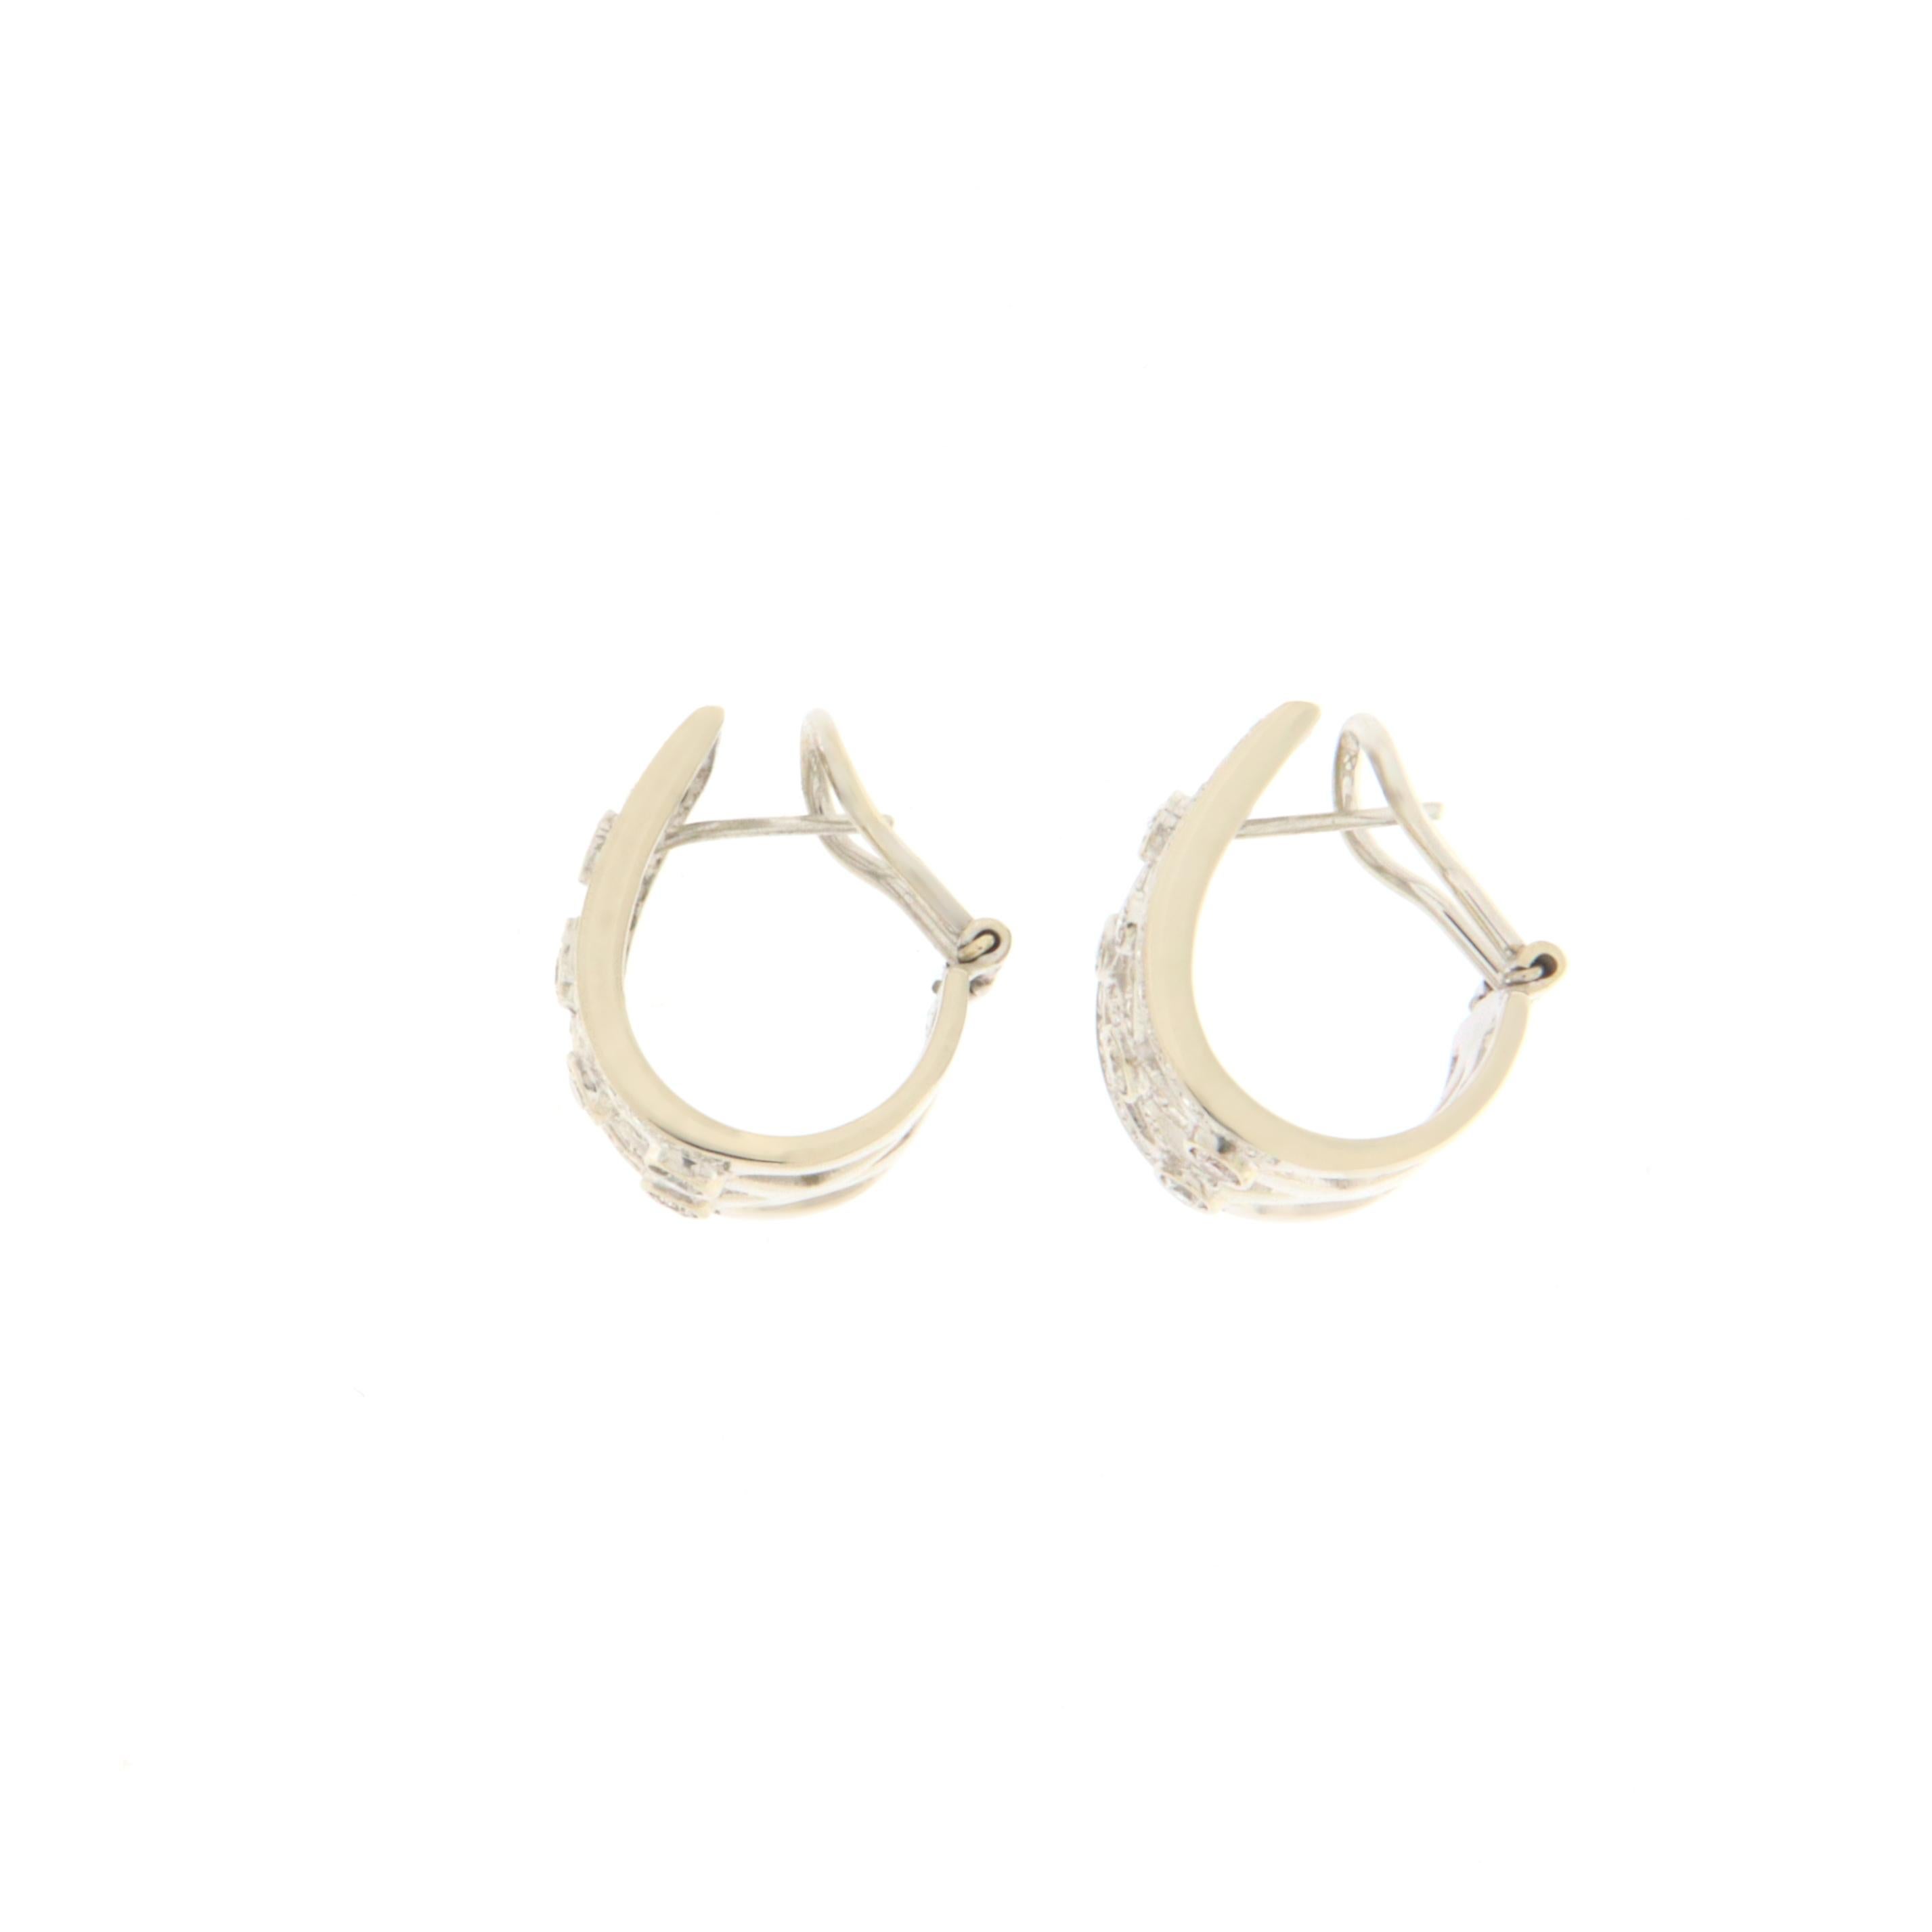 Delicious stud earring made entirely by hand.  On the earrings made of 18K white gold there are natural diamonds of different sizes.
A delicate and easily exhibited earring on any occasion that showcases the beauty of every woman.

Total weight of